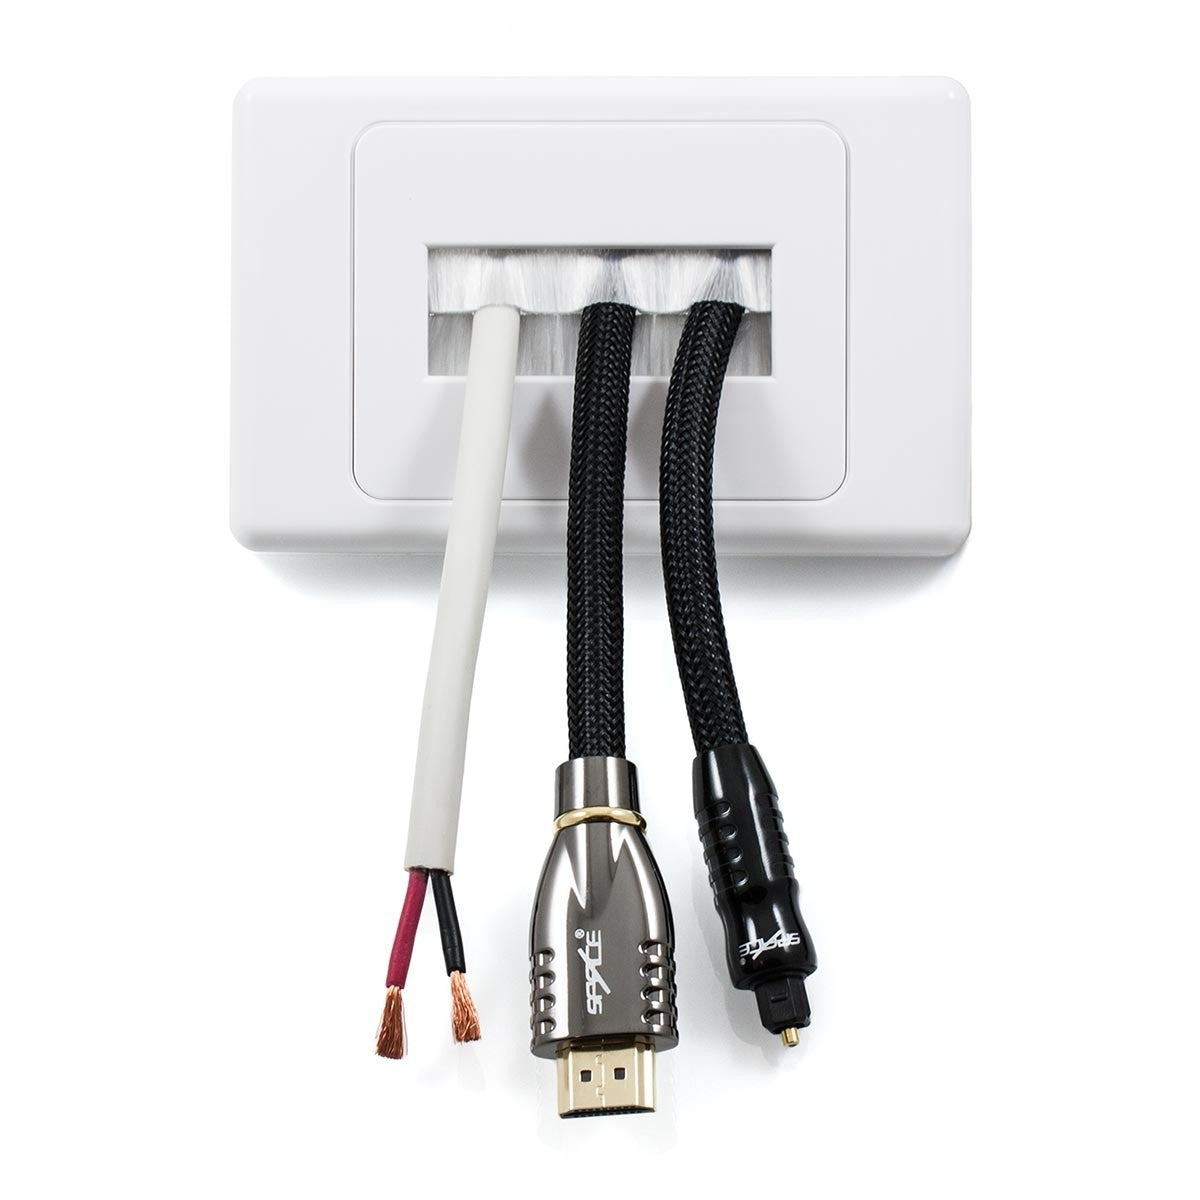 Brush Wall Plate for In Wall Cable Entry, AC-BWP-01W - CCTVMasters.com.au